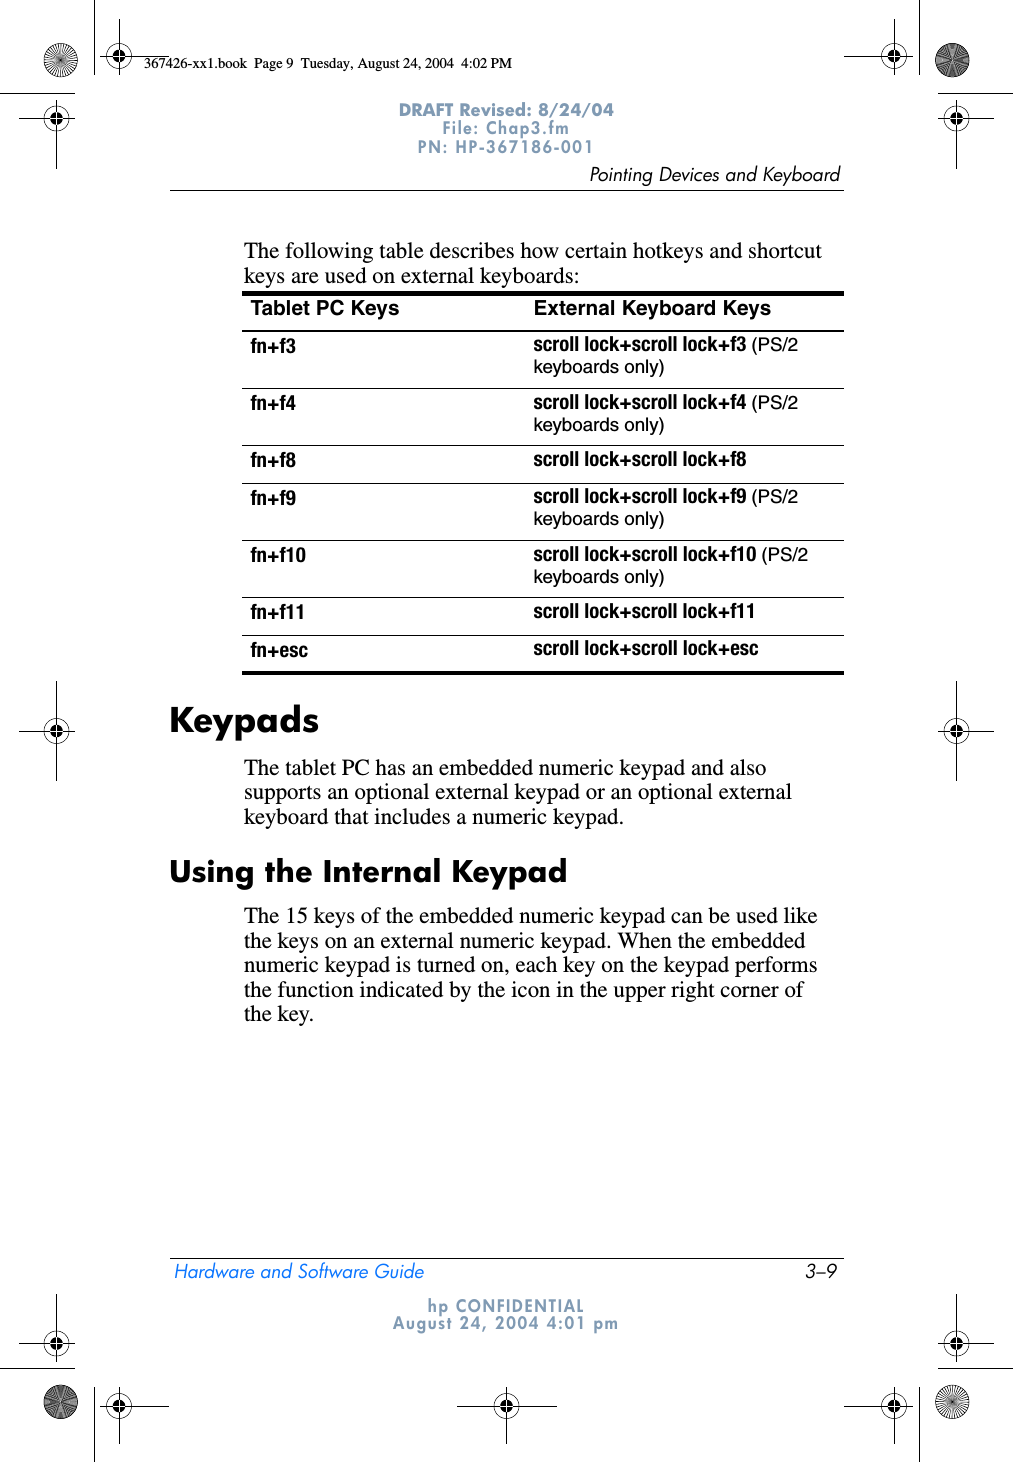 Pointing Devices and KeyboardHardware and Software Guide 3–9DRAFT Revised: 8/24/04File: Chap3.fm PN: HP-367186-001 hp CONFIDENTIALAugust 24, 2004 4:01 pmThe following table describes how certain hotkeys and shortcut keys are used on external keyboards:KeypadsThe tablet PC has an embedded numeric keypad and also supports an optional external keypad or an optional external keyboard that includes a numeric keypad.Using the Internal KeypadThe 15 keys of the embedded numeric keypad can be used like the keys on an external numeric keypad. When the embedded numeric keypad is turned on, each key on the keypad performs the function indicated by the icon in the upper right corner of the key.Tablet PC Keys External Keyboard Keysfn+f3 scroll lock+scroll lock+f3 (PS/2 keyboards only)fn+f4 scroll lock+scroll lock+f4 (PS/2 keyboards only)fn+f8 scroll lock+scroll lock+f8fn+f9 scroll lock+scroll lock+f9 (PS/2 keyboards only)fn+f10 scroll lock+scroll lock+f10 (PS/2 keyboards only)fn+f11 scroll lock+scroll lock+f11fn+esc scroll lock+scroll lock+esc367426-xx1.book  Page 9  Tuesday, August 24, 2004  4:02 PM